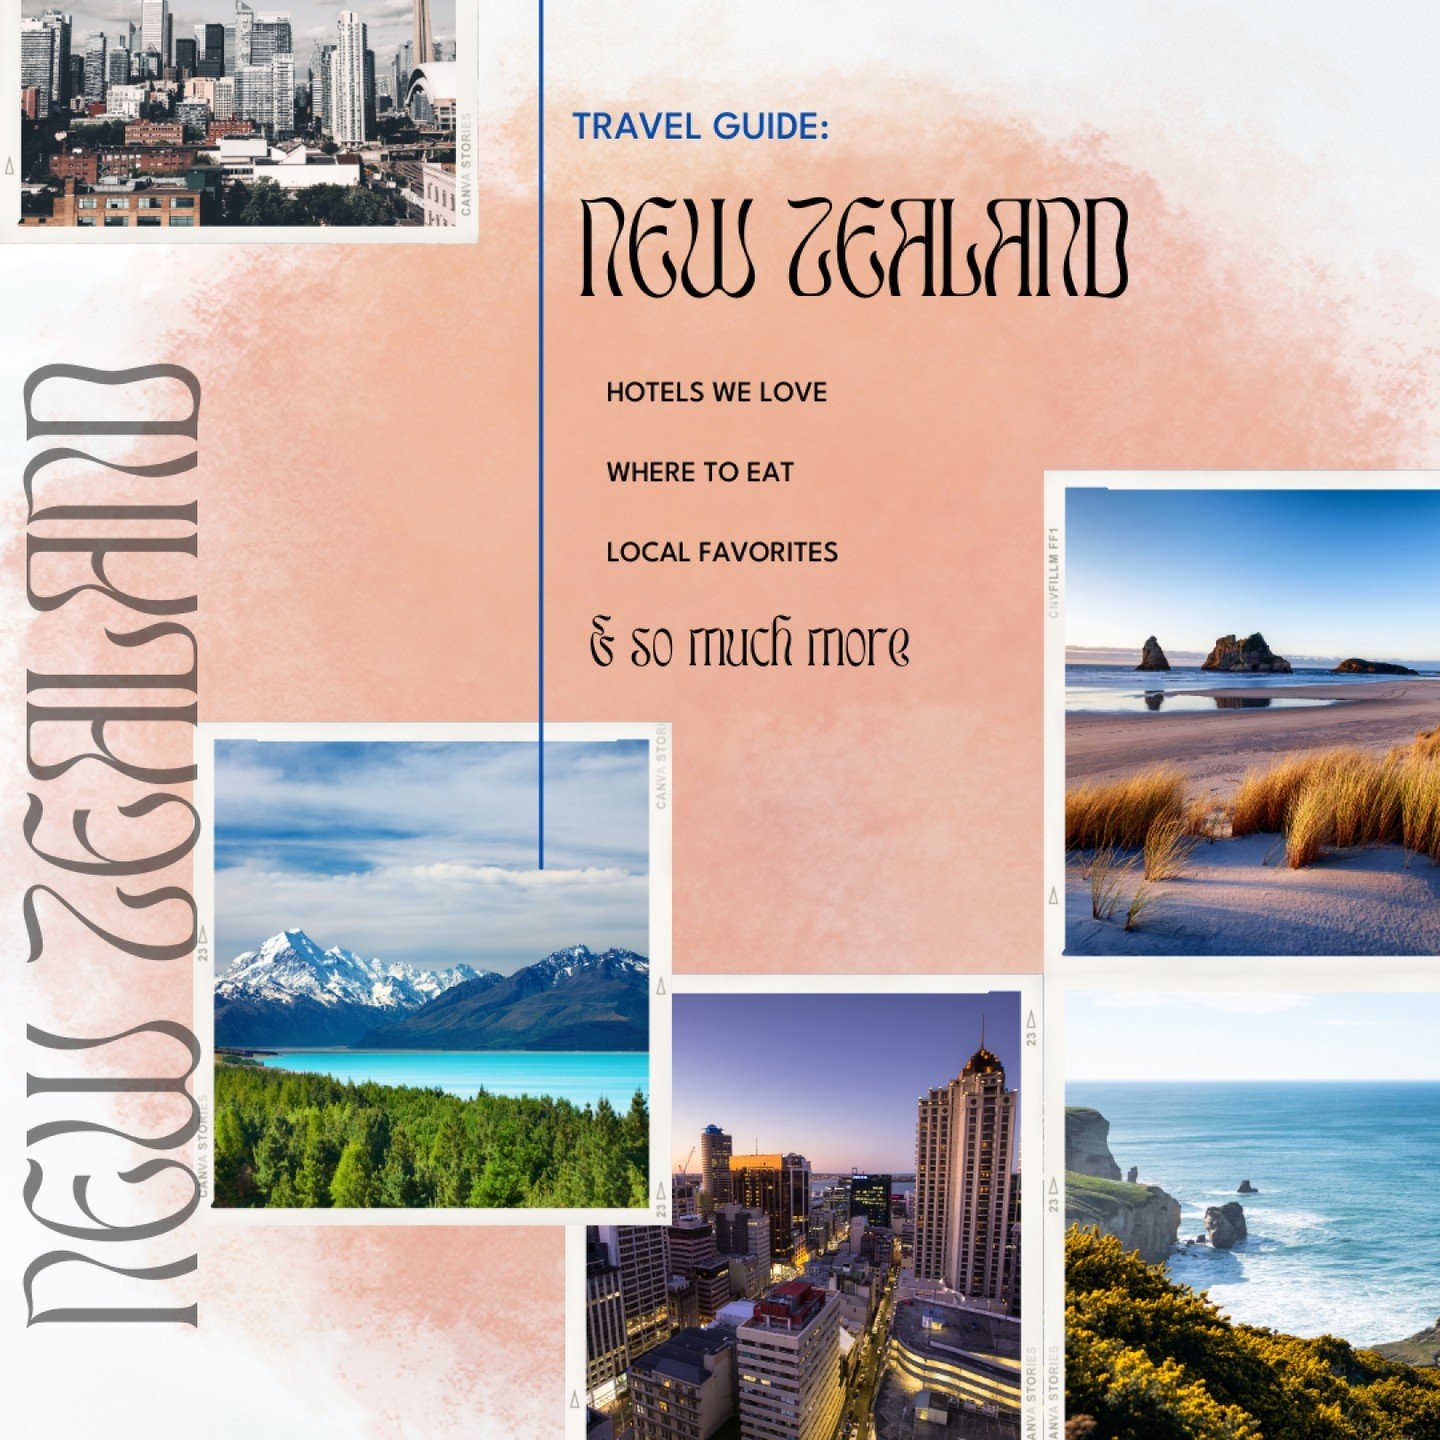 Dreaming of breathtaking landscapes and unforgettable adventures? Our comprehensive New Zealand travel guide has everything you need to plan your epic journey! From the snow-capped peaks of the Southern Alps to the pristine beaches of the Bay of Isla